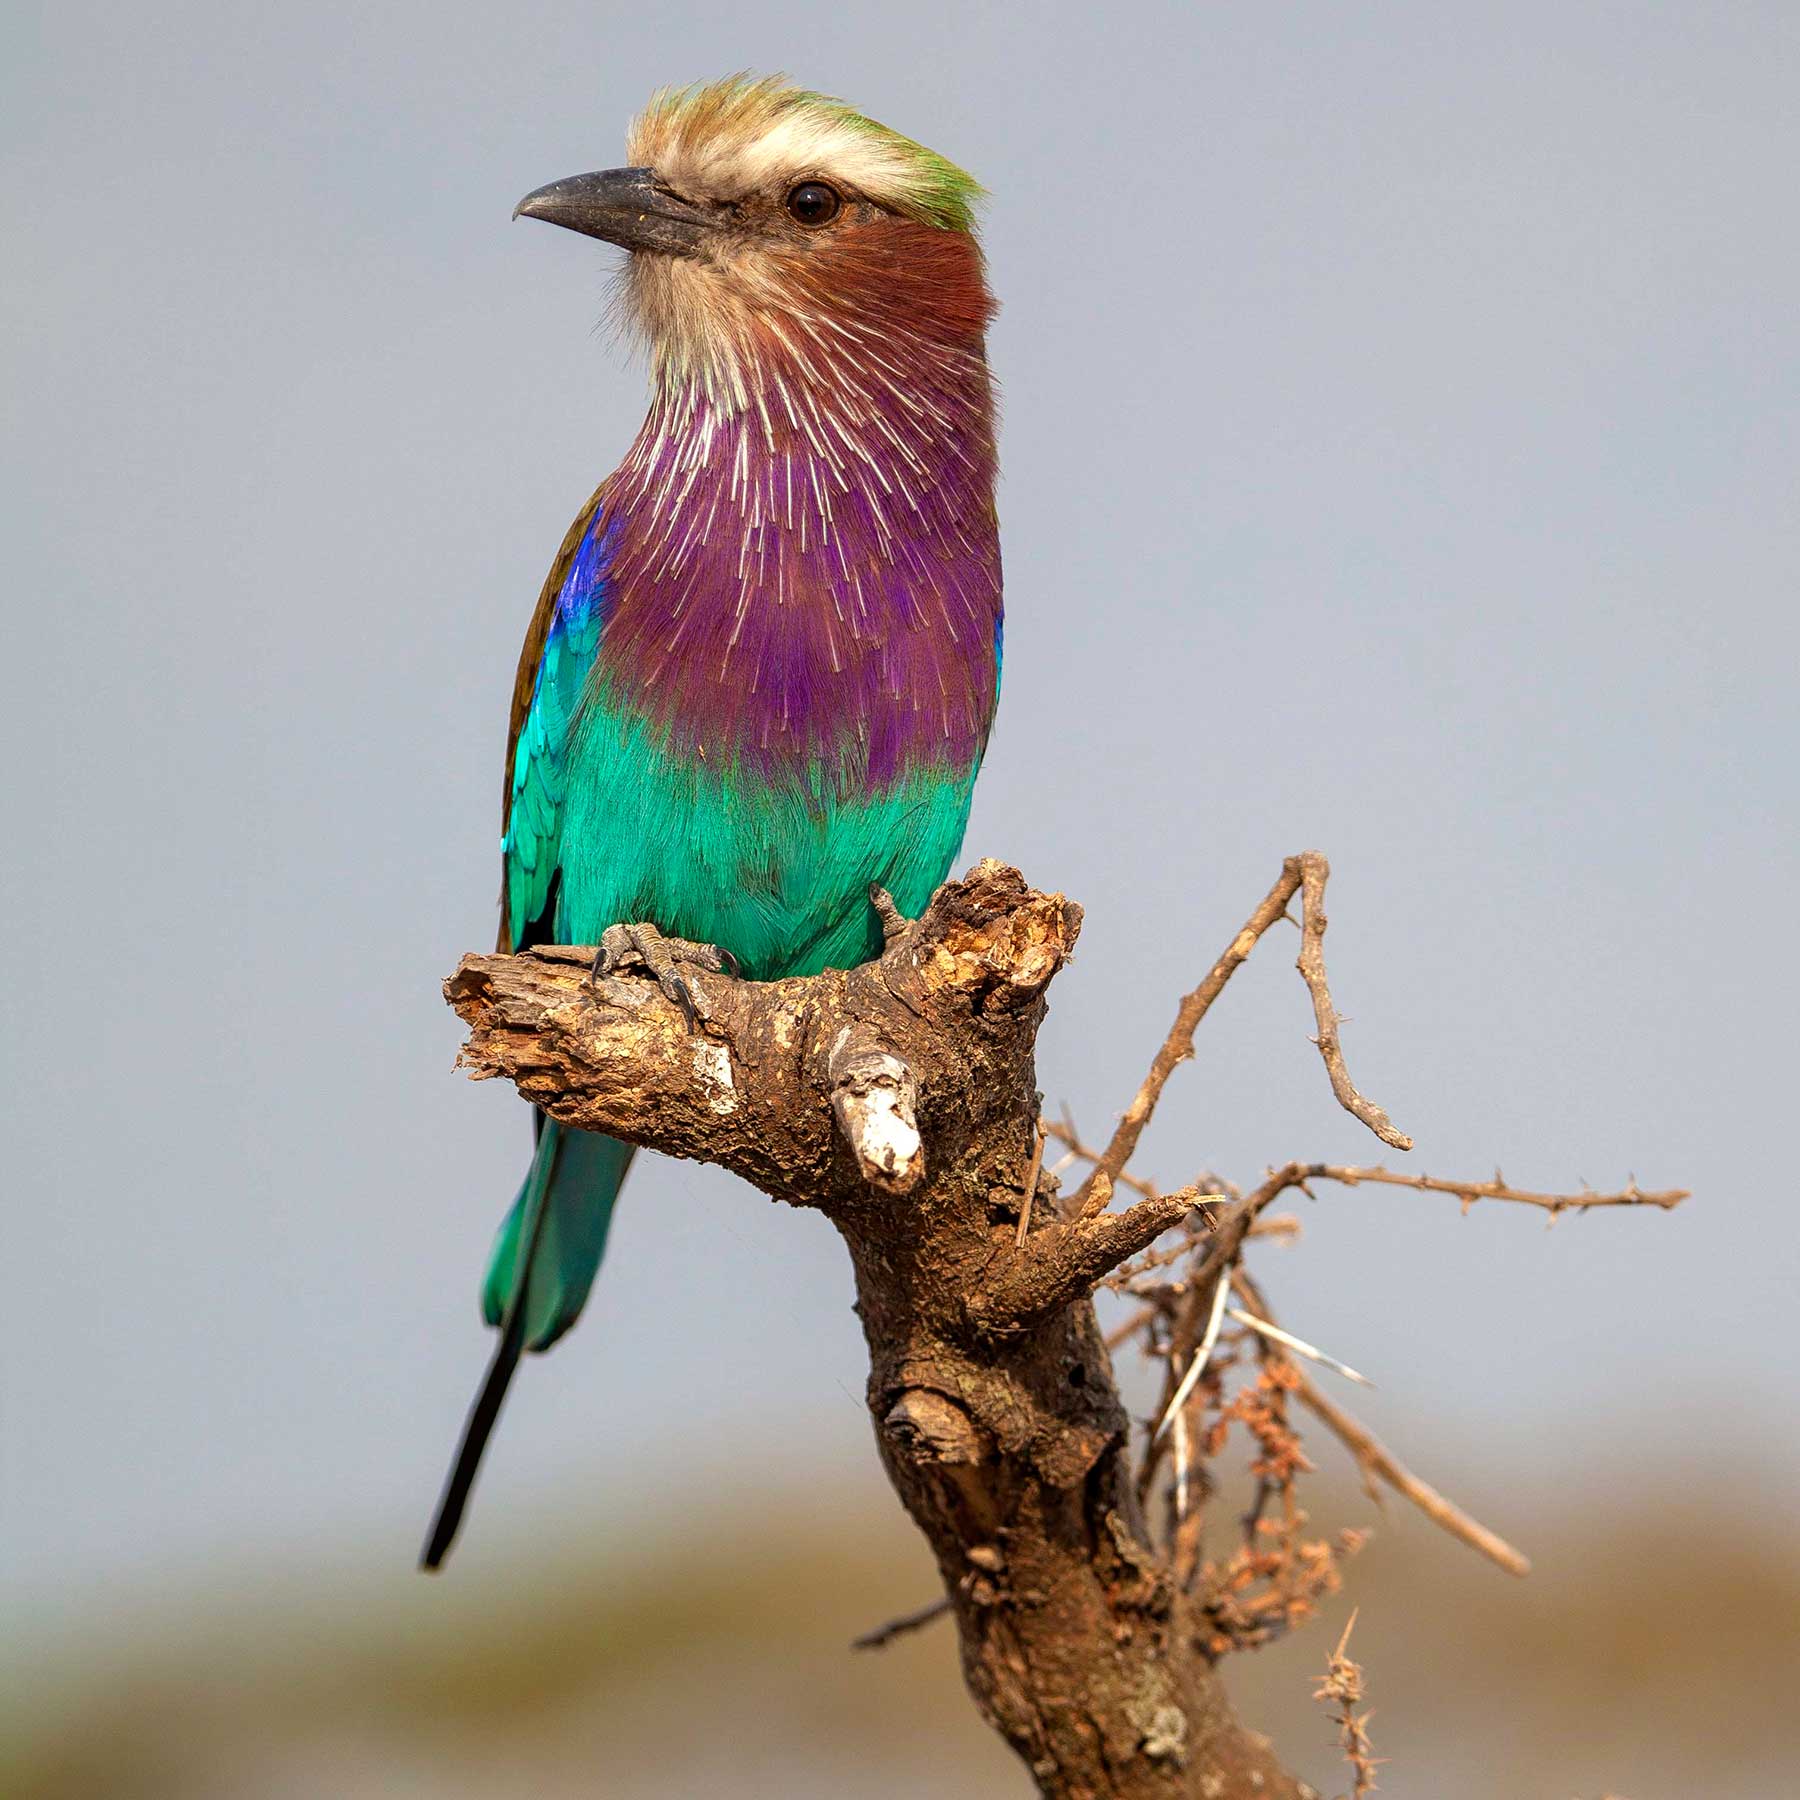 Lilac breasted roller bird (Image: Copyright Nori Jemil)